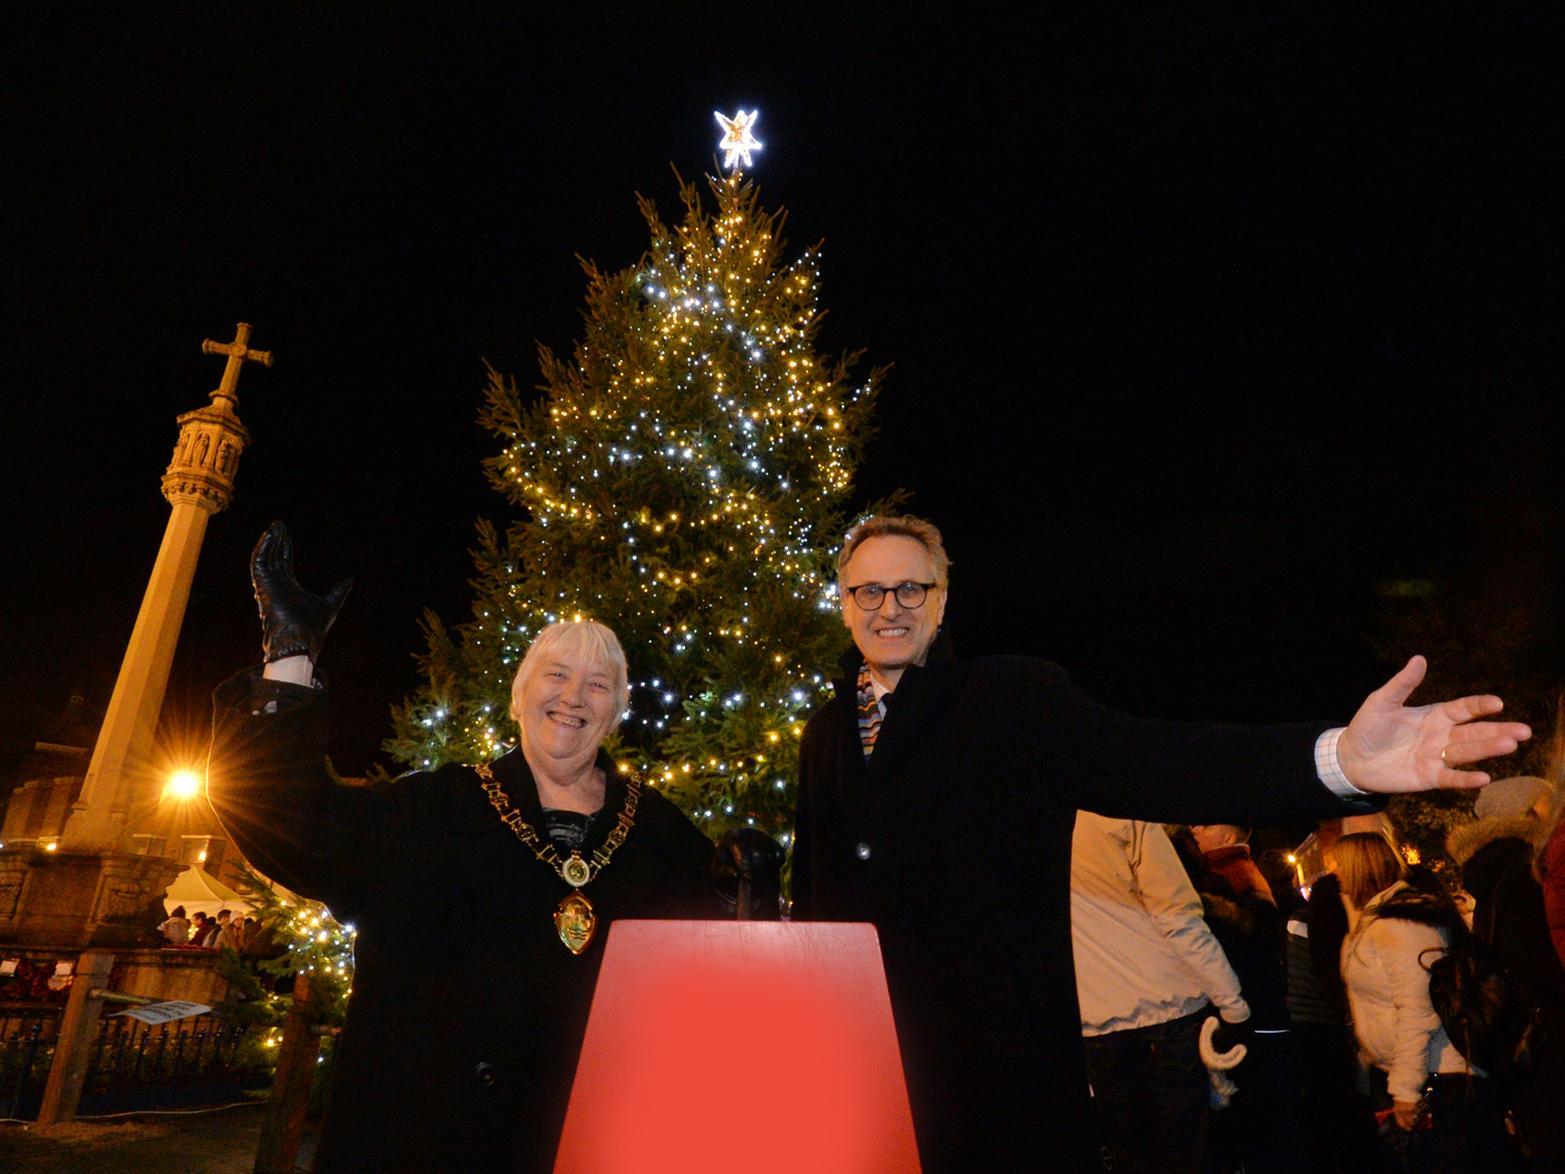 Chairman of Harborough District Council Barbara Johnson and Mark Robinson chief executive of Market Harborough Building Society switch on the Christmas Tree lights on the Square.